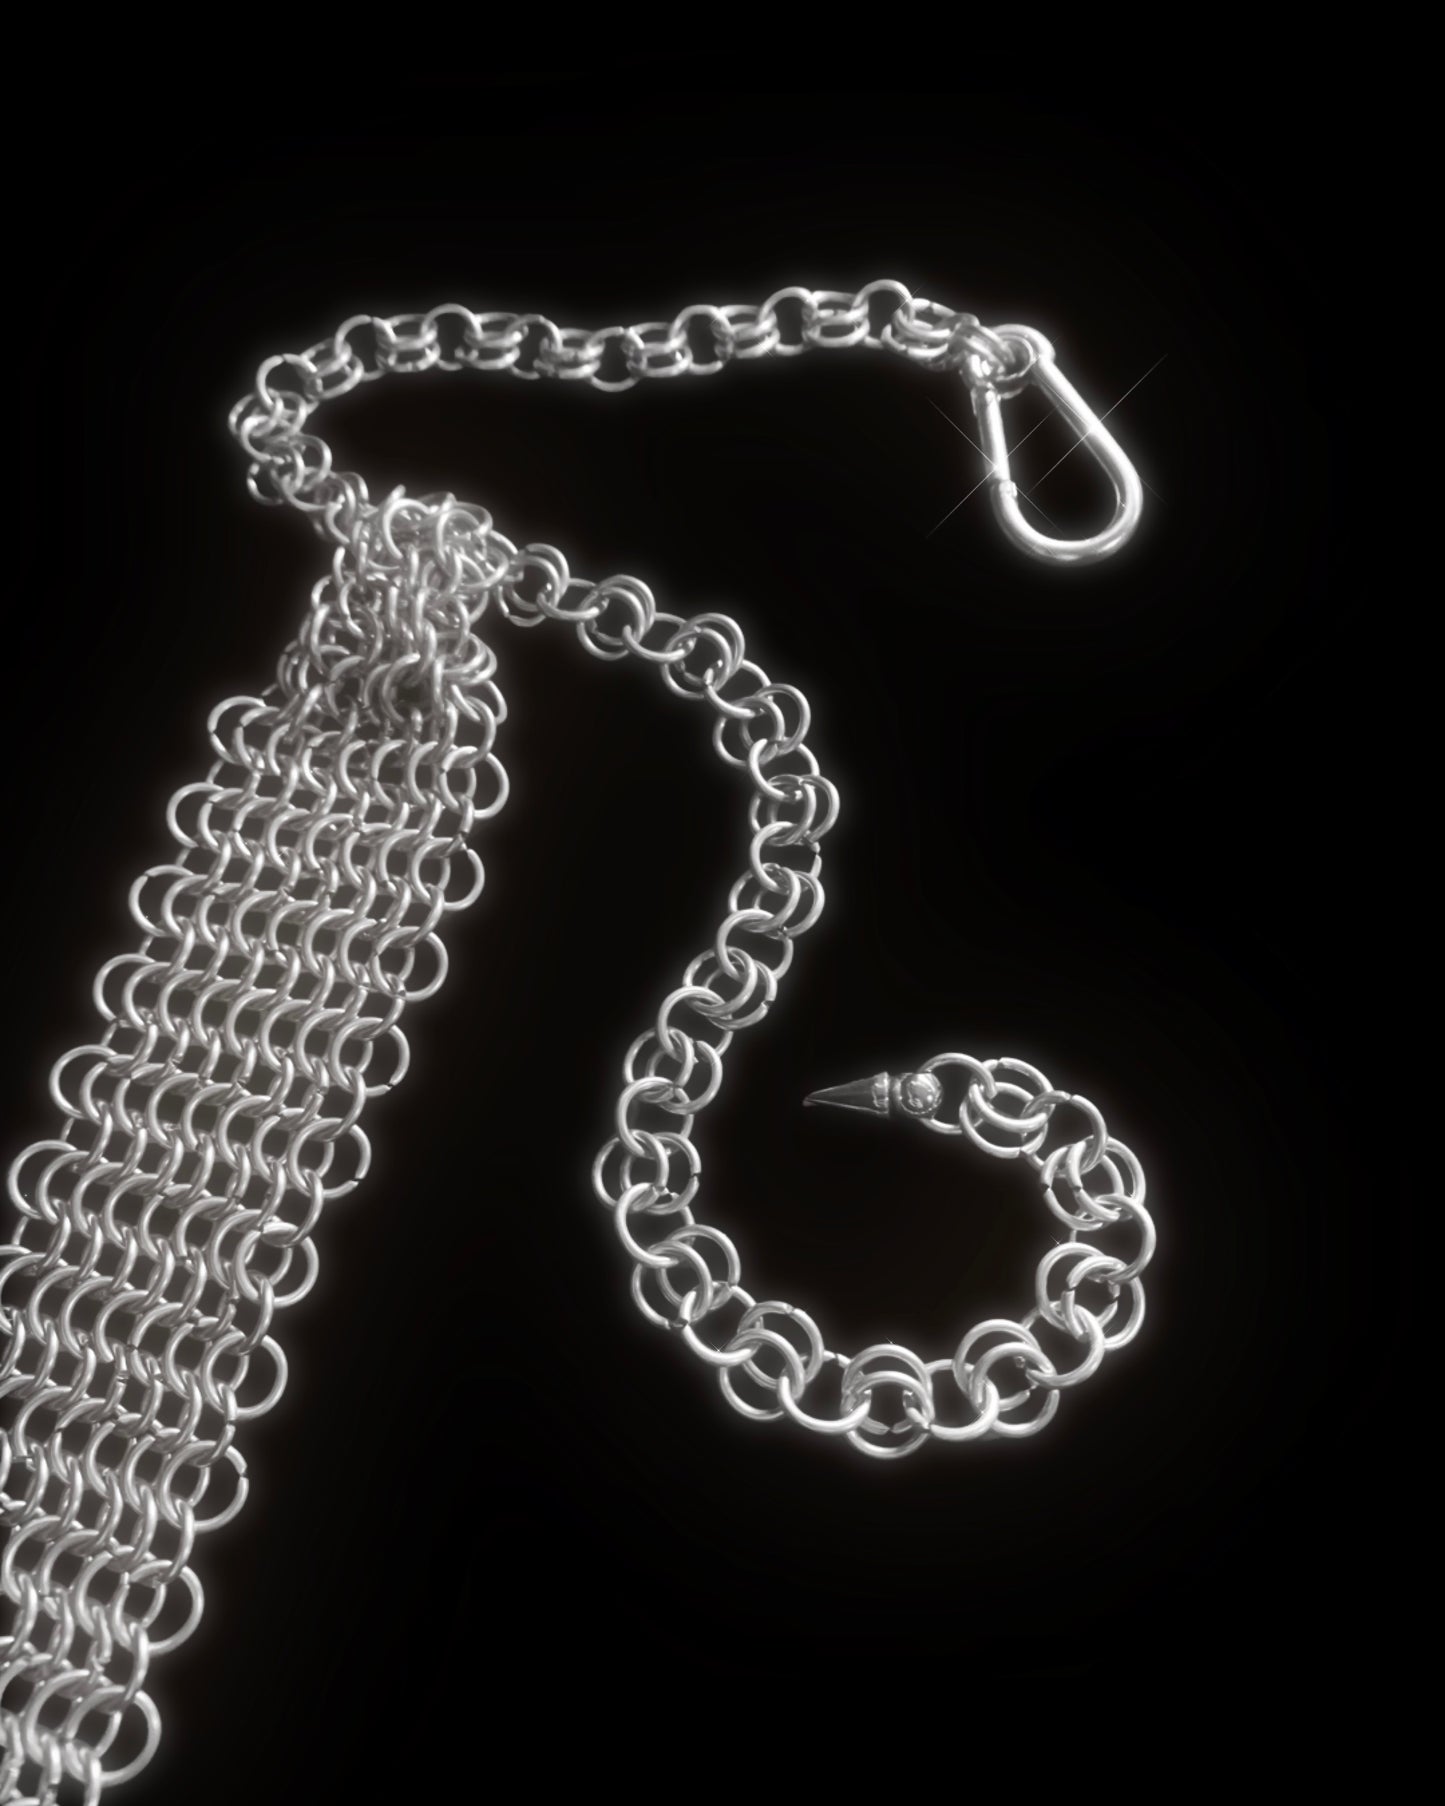 Maille Tie Commission